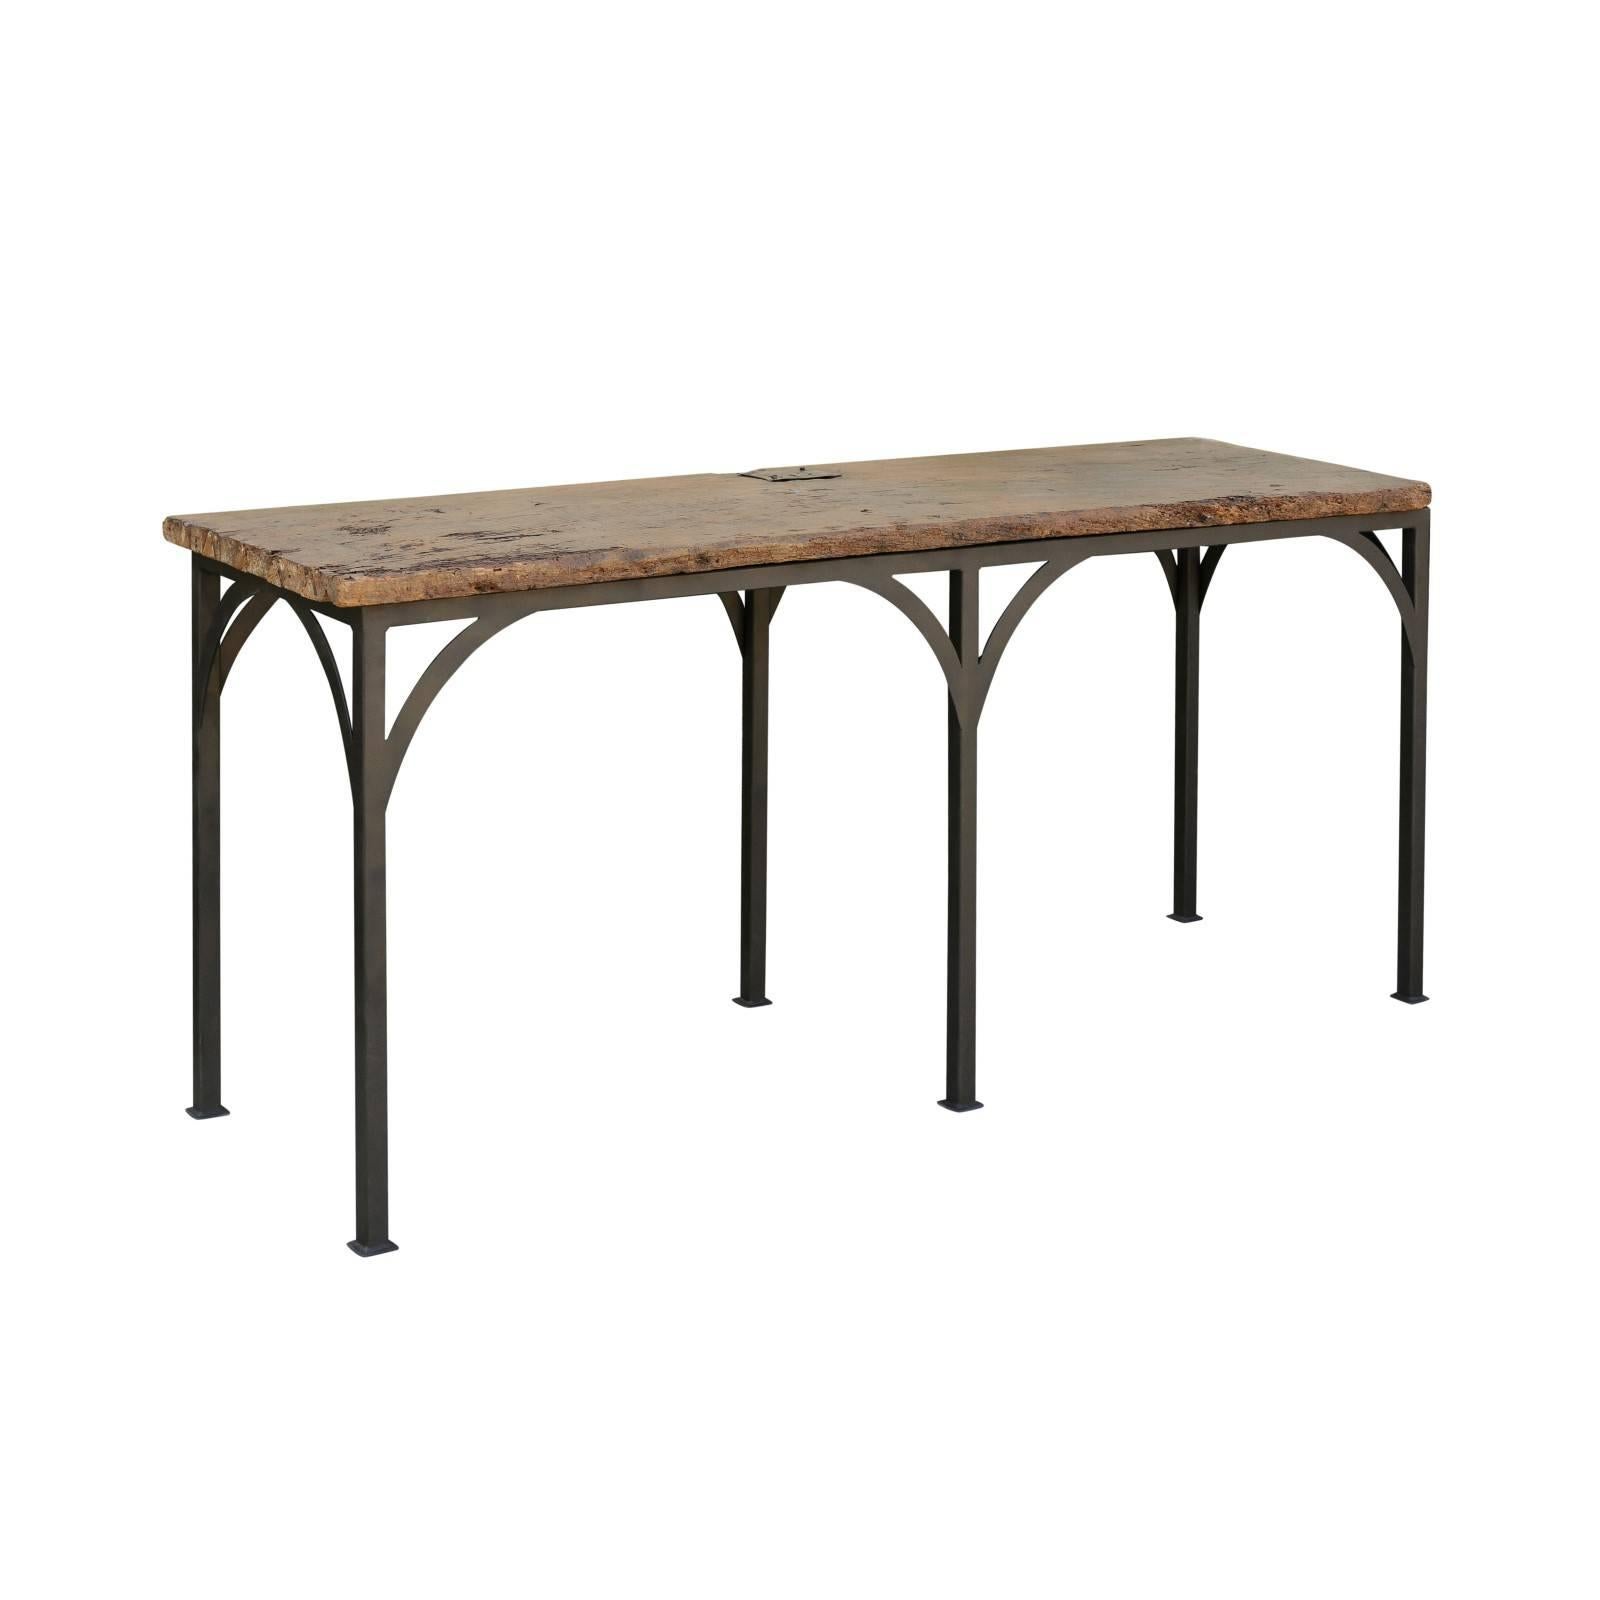 Console Table Made of an 18th Century Spanish Chestnut Board on Custom Iron Base